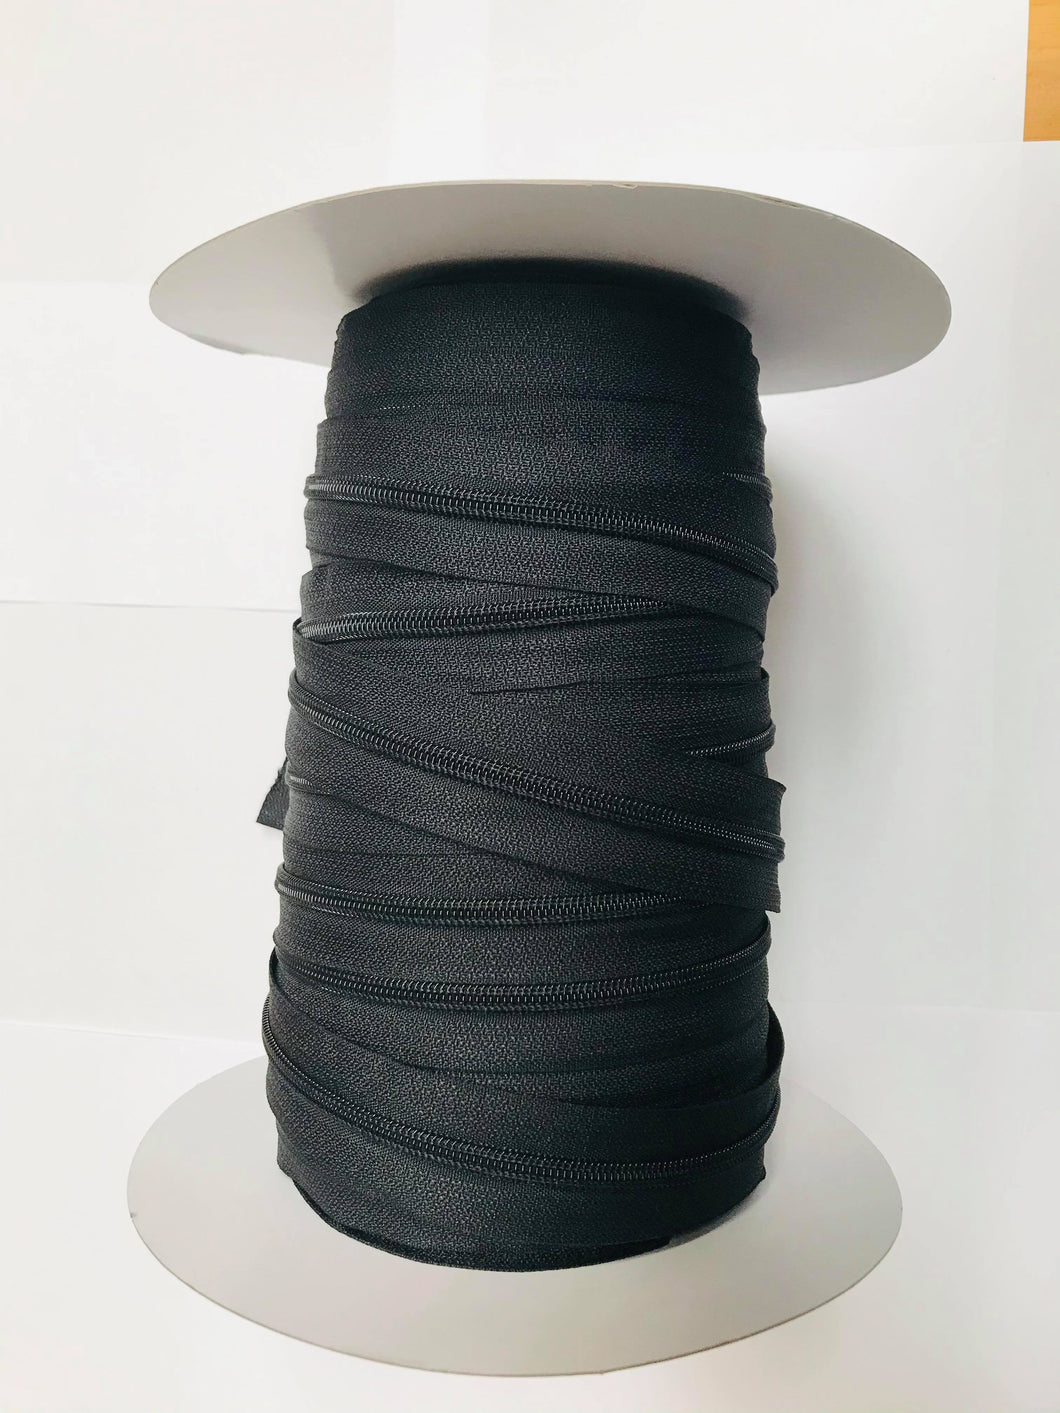 Our black quality continuous zip is Ideal for all of your upholstery and sewing needs.    No 5 Heavyweight zip is ideal for caravan, boat and campers.  